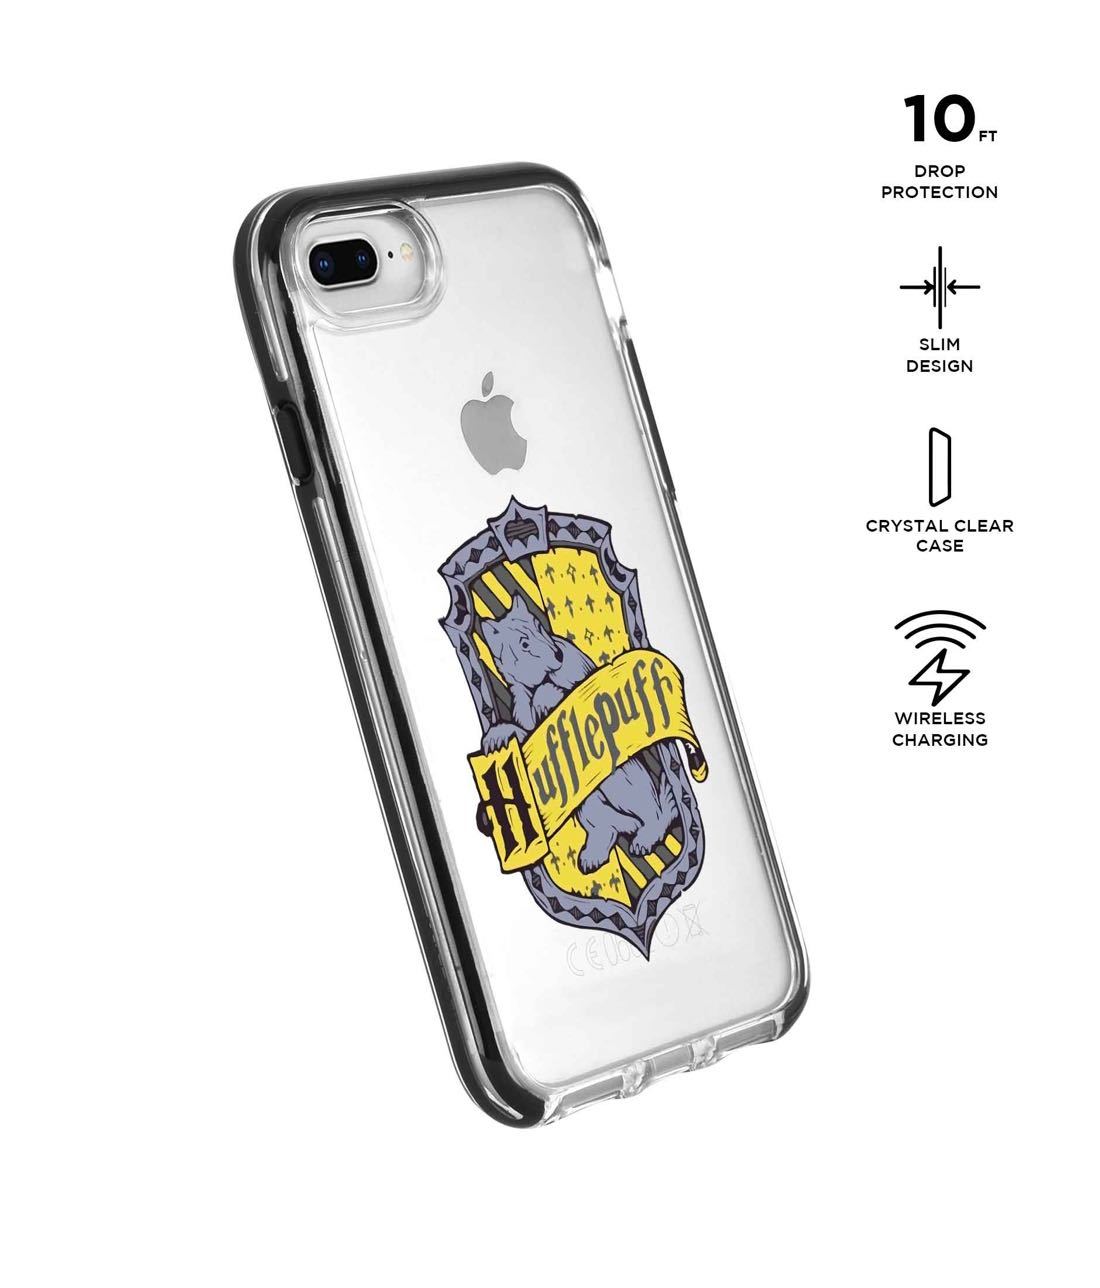 Crest Hufflepuff - Extreme Phone Case for iPhone 8 Plus